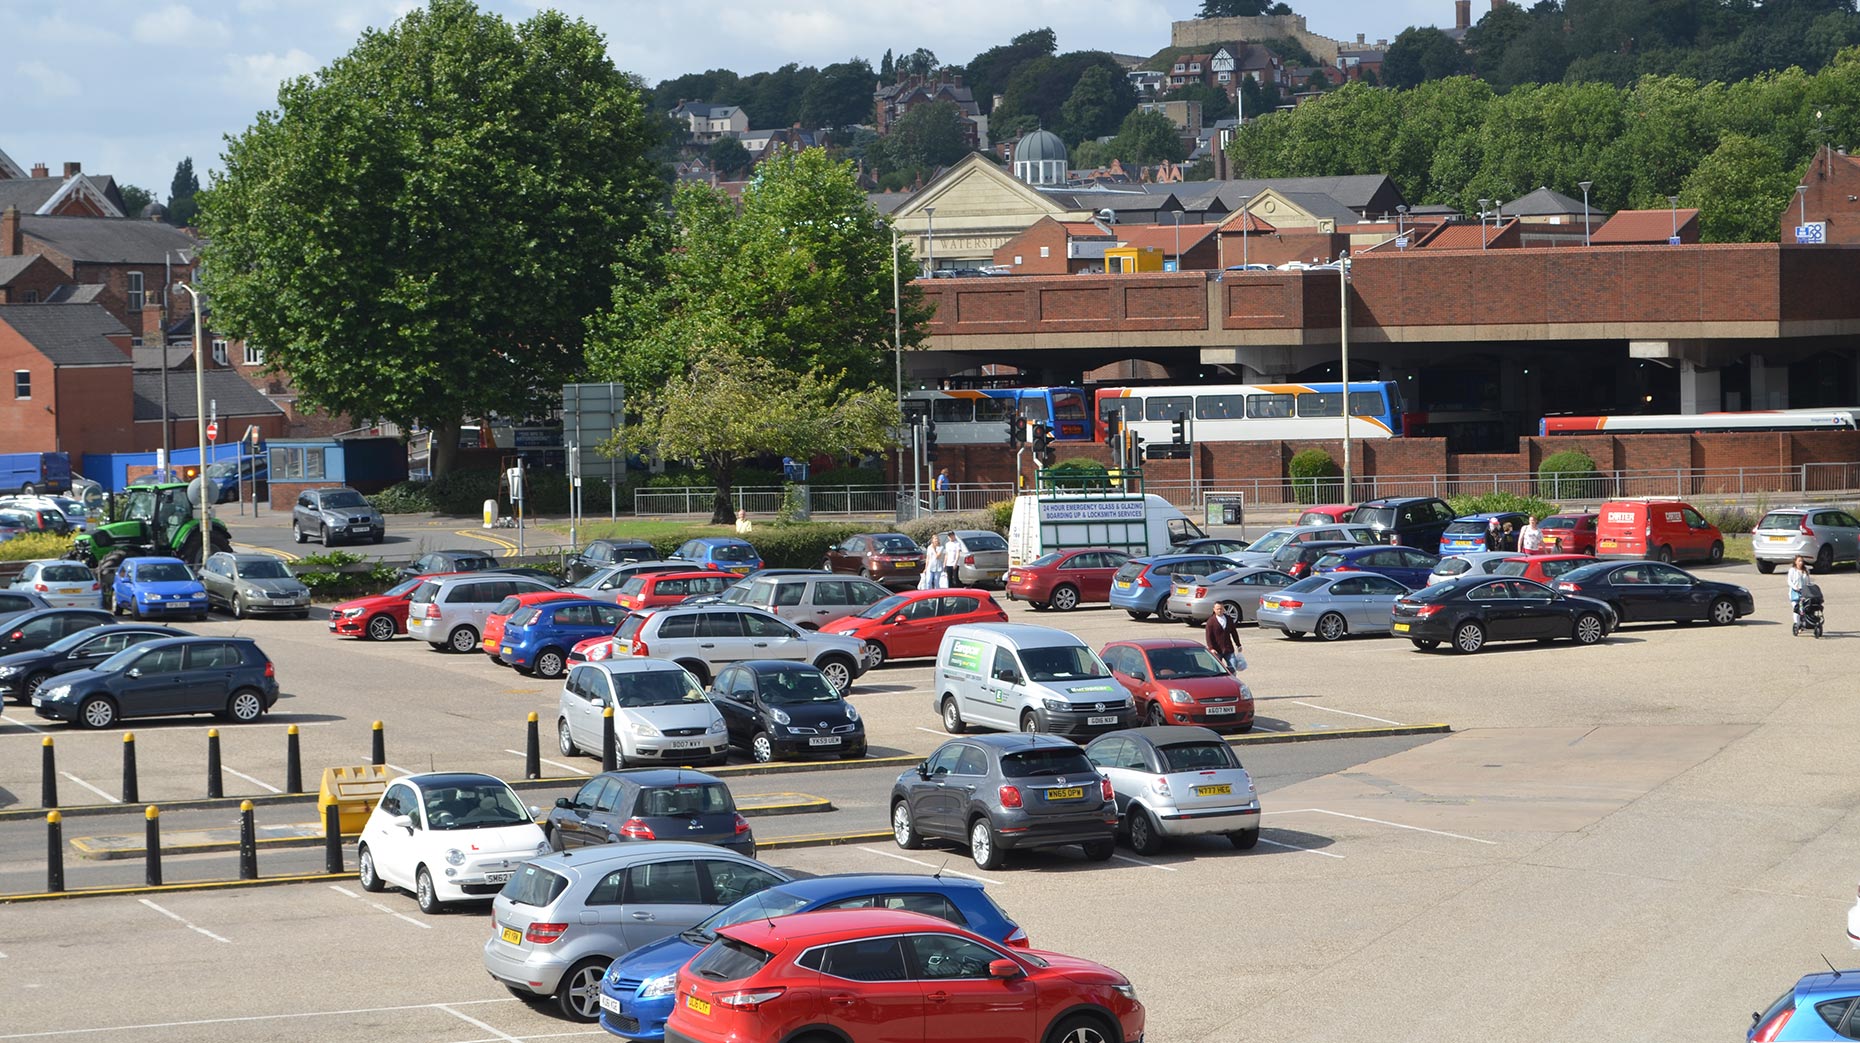 St Mary's Street car park will be permanently closed from August 29. 